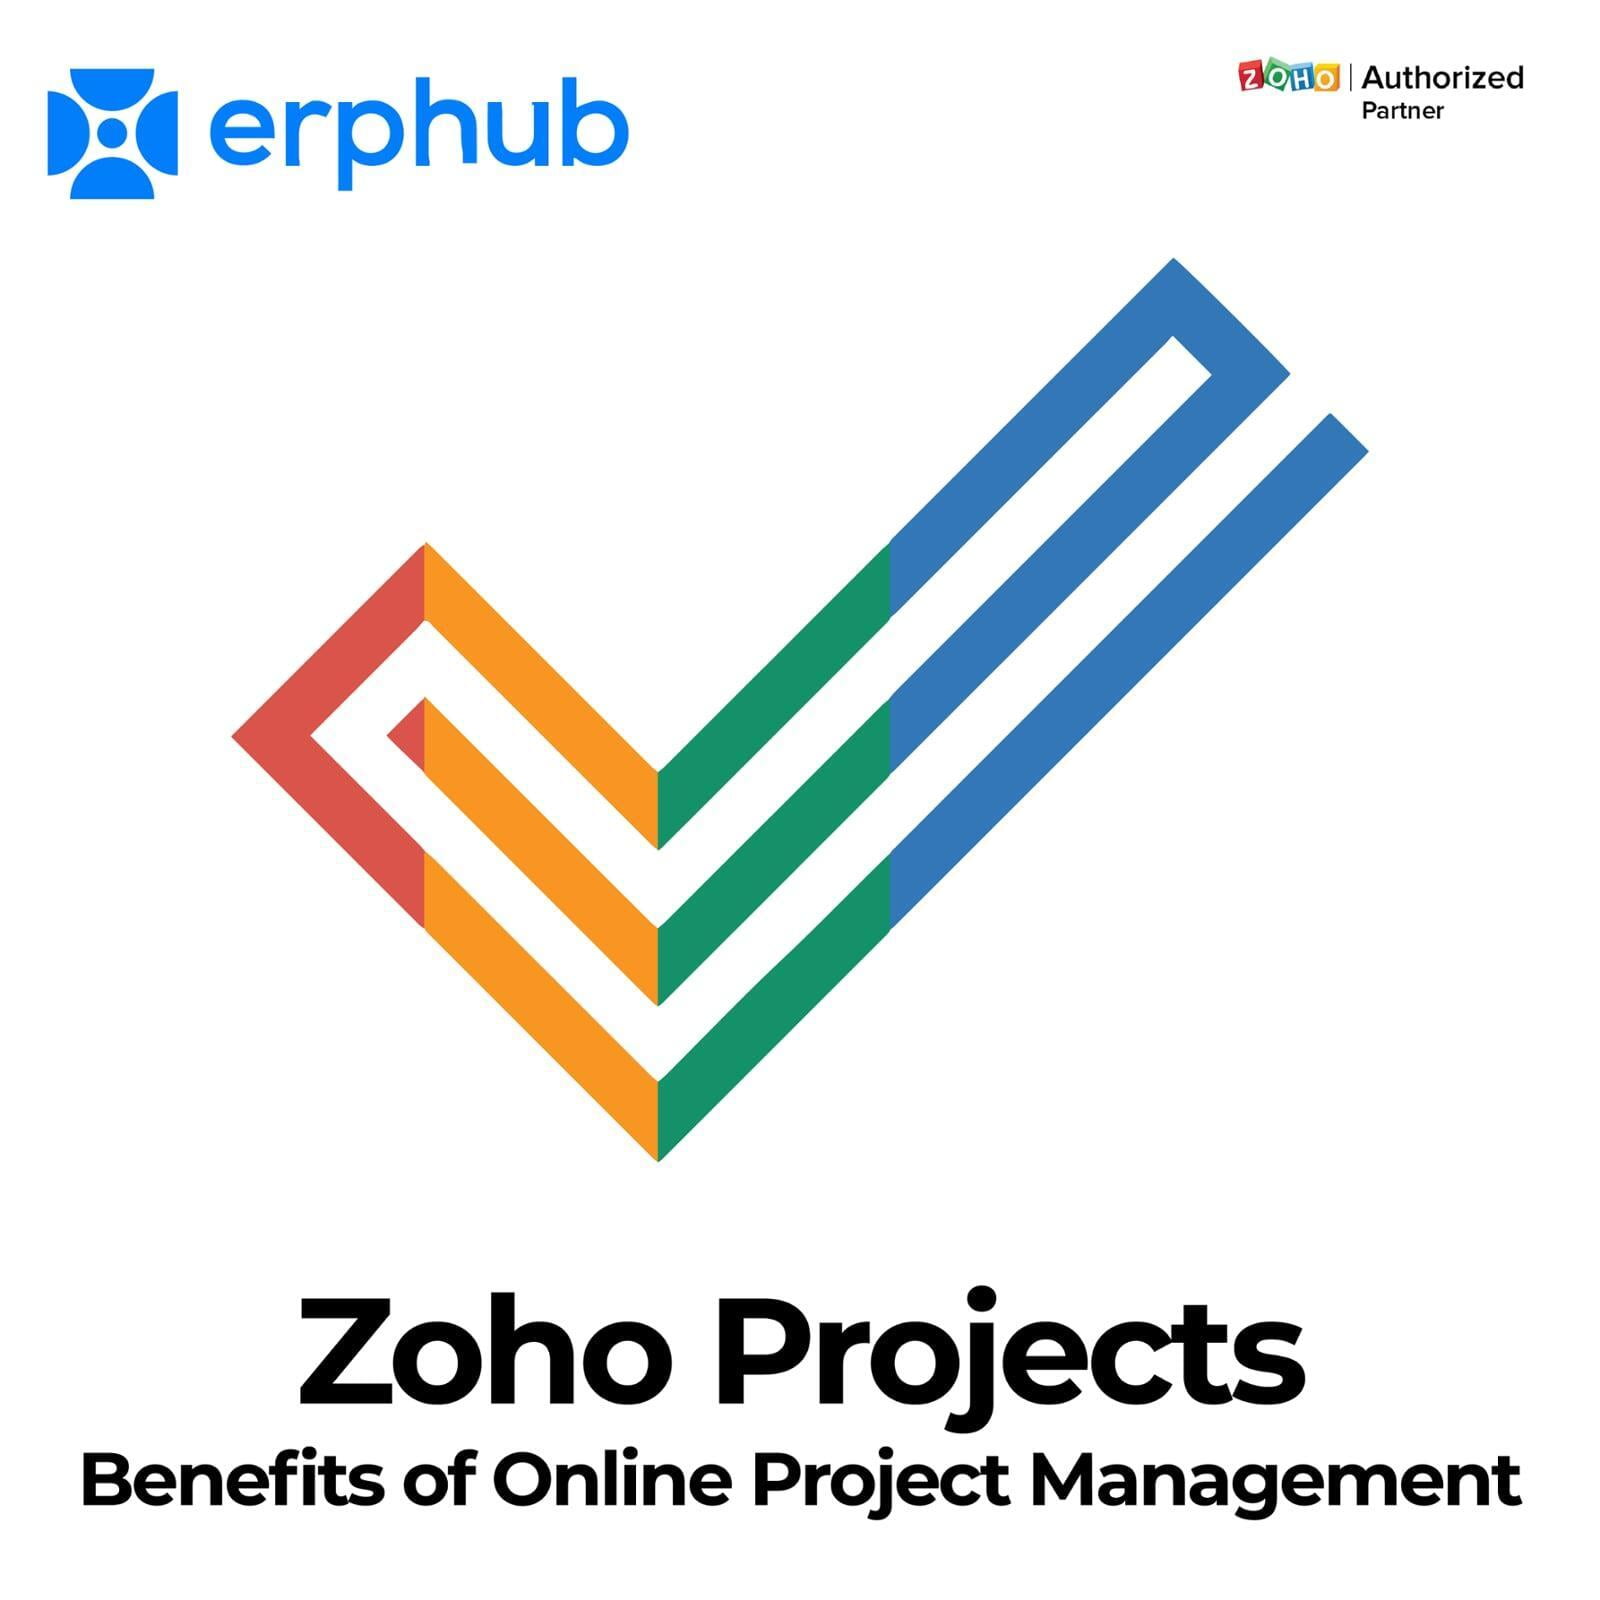 Zoho Projects: The Benefits of Online Project Management